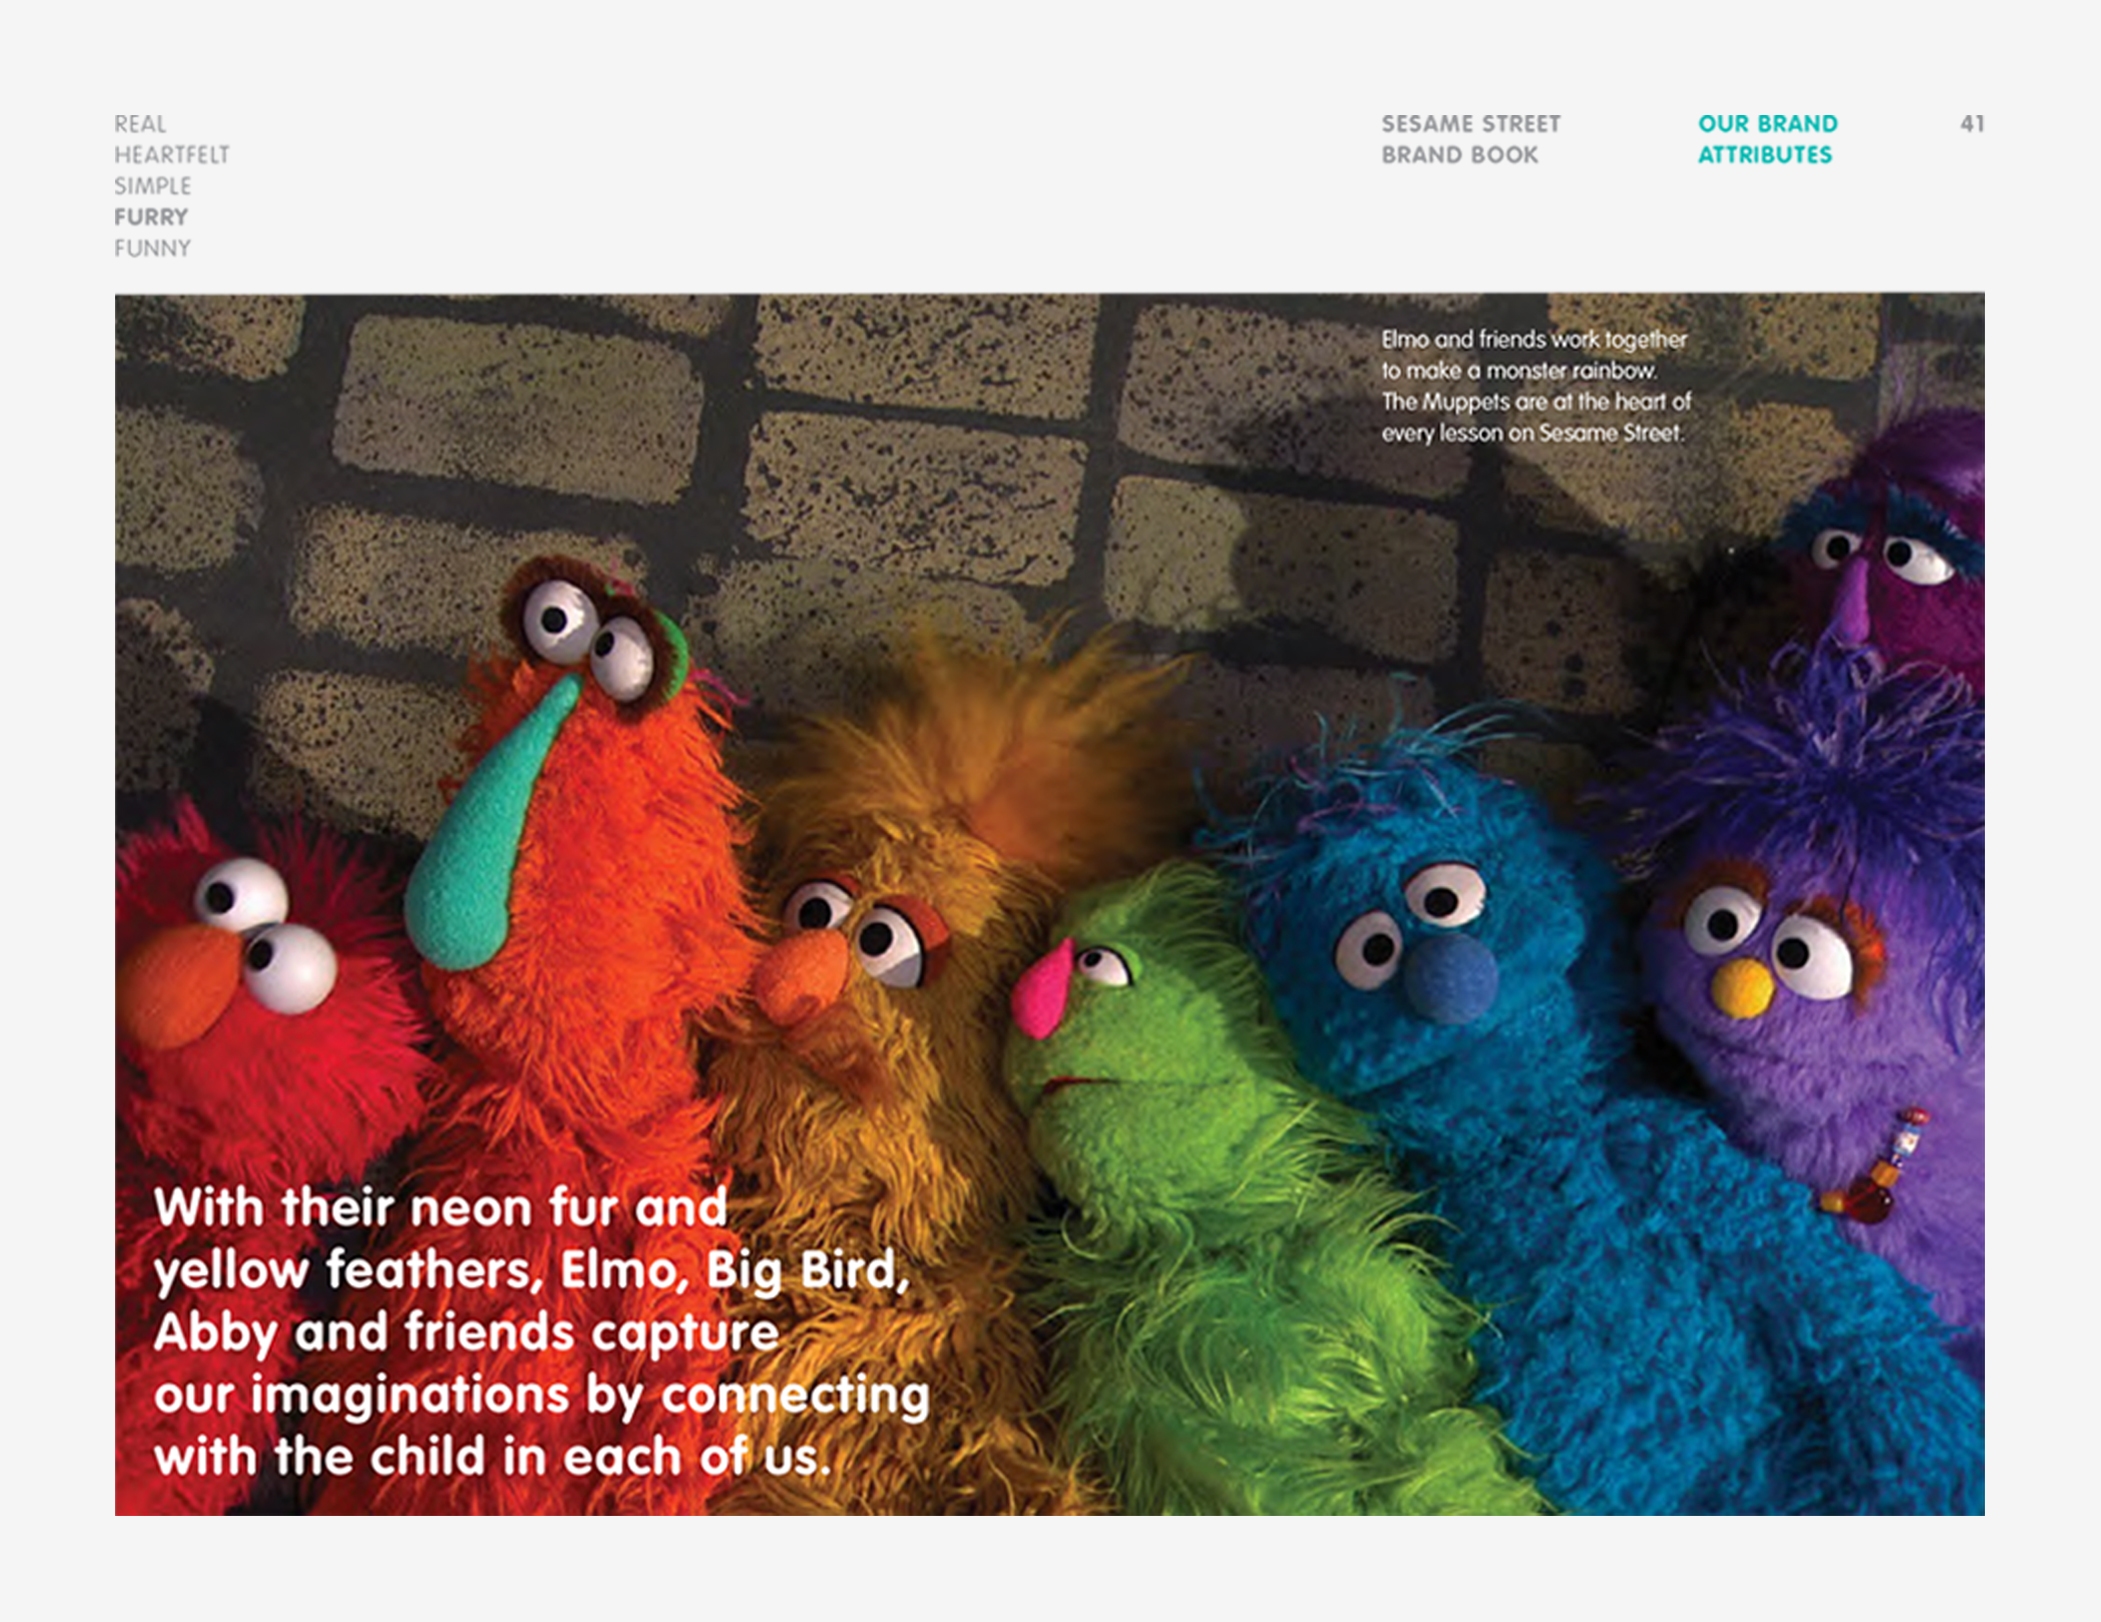 A brand attributes page from the Sesame Workshop Brand Book with a group furry muppets side by side on a brick sidewalk.